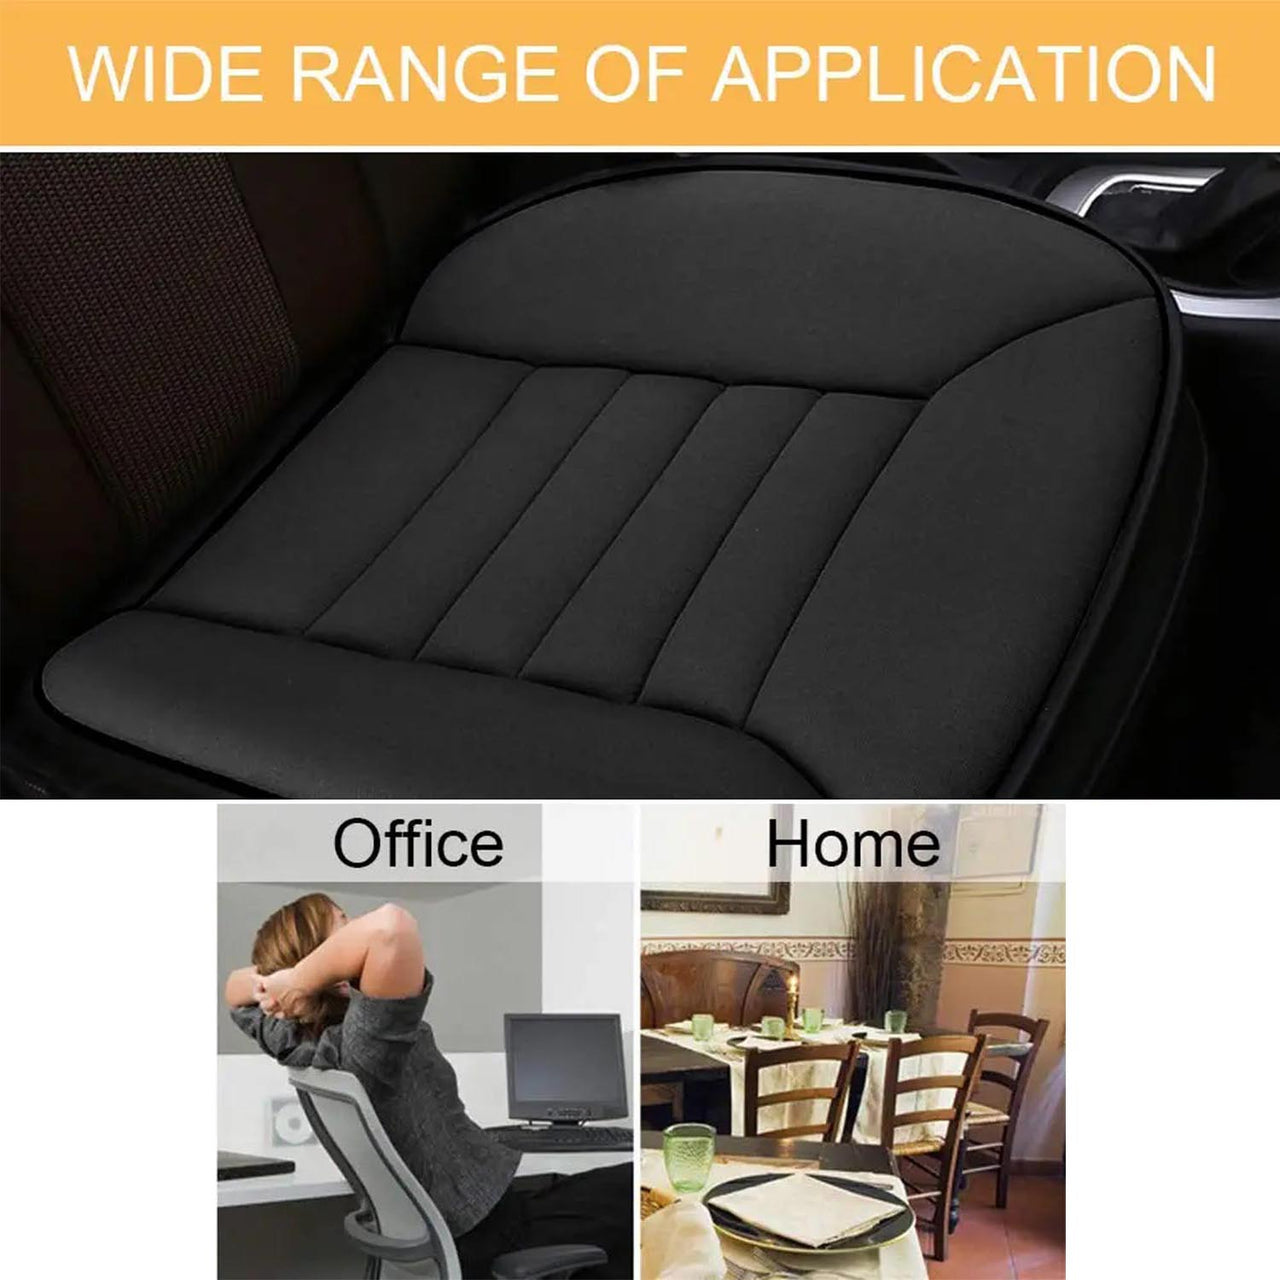 Car Seat Cushion with 1.2inch Comfort Memory Foam, Custom Fit For Your Cars, Seat Cushion for Car and Office Chair MT19989